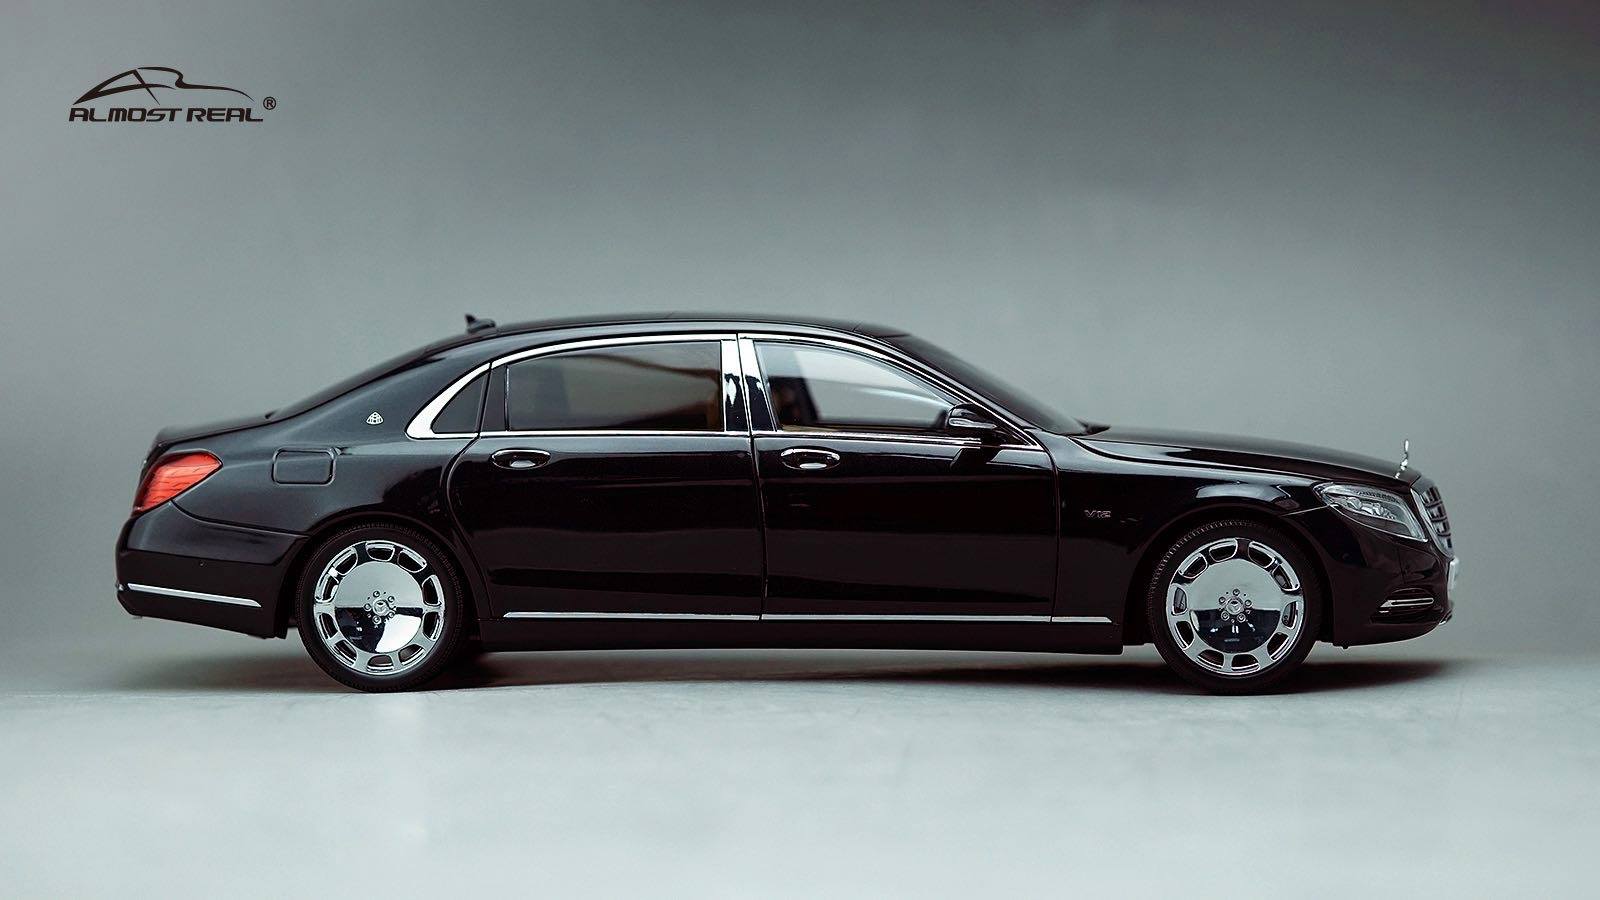 Almost Real Mercedes Maybach S-class Black 1:18